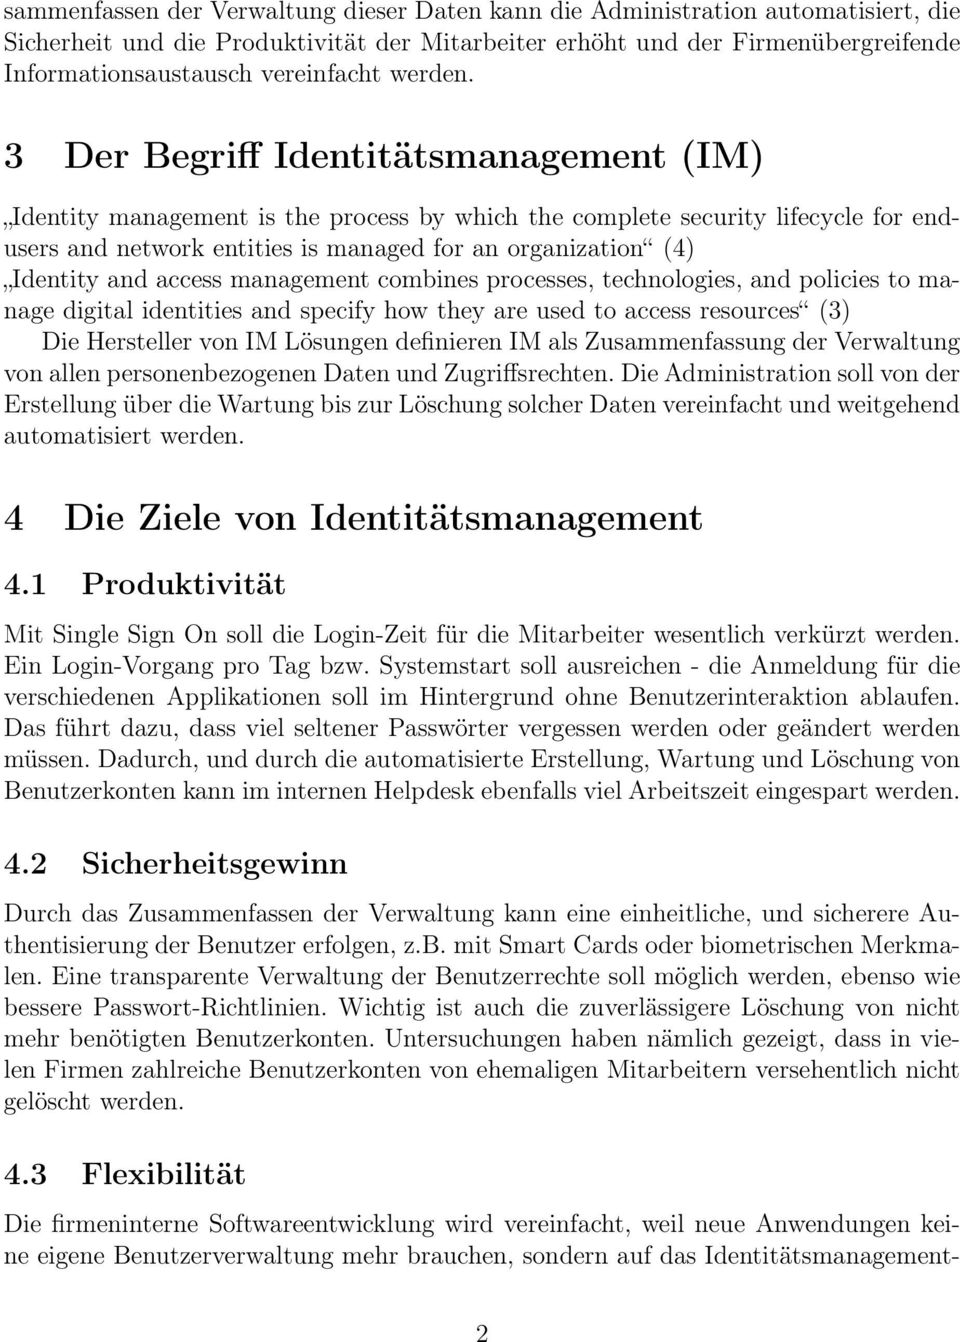 3 Der Begriff Identitätsmanagement (IM) Identity management is the process by which the complete security lifecycle for endusers and network entities is managed for an organization (4) Identity and